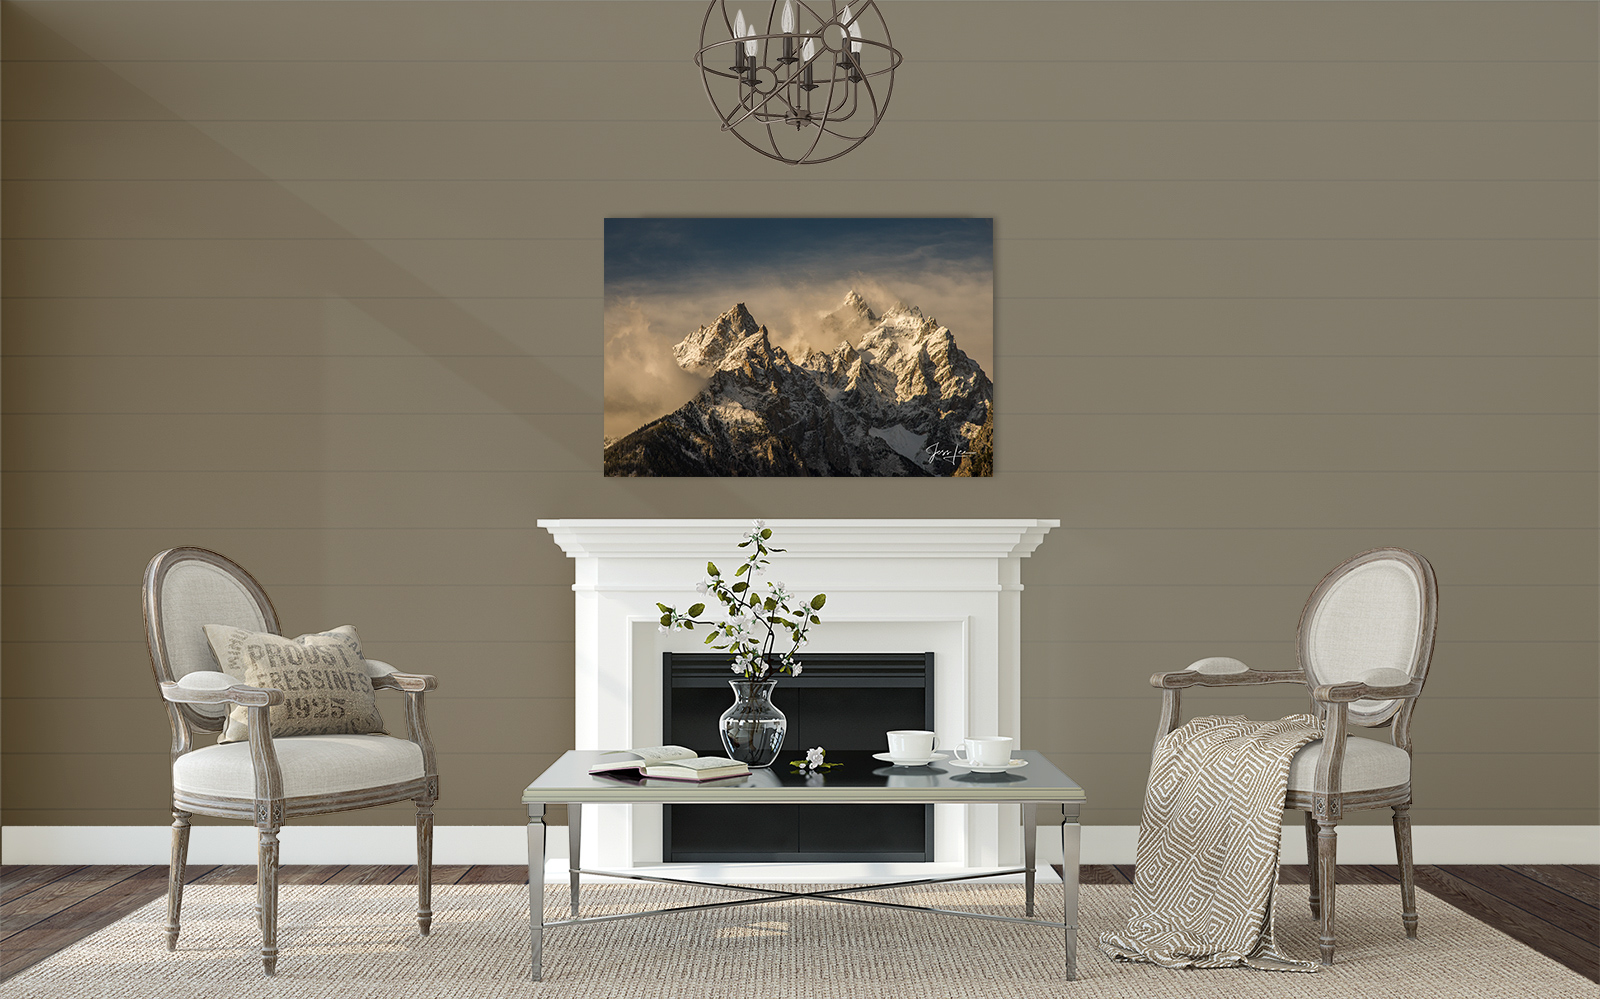 Mountain Photography Prints. Pictures are available as Acrylic, Metal, Canvas, or Fine Art Paper limited edition wall art prints...